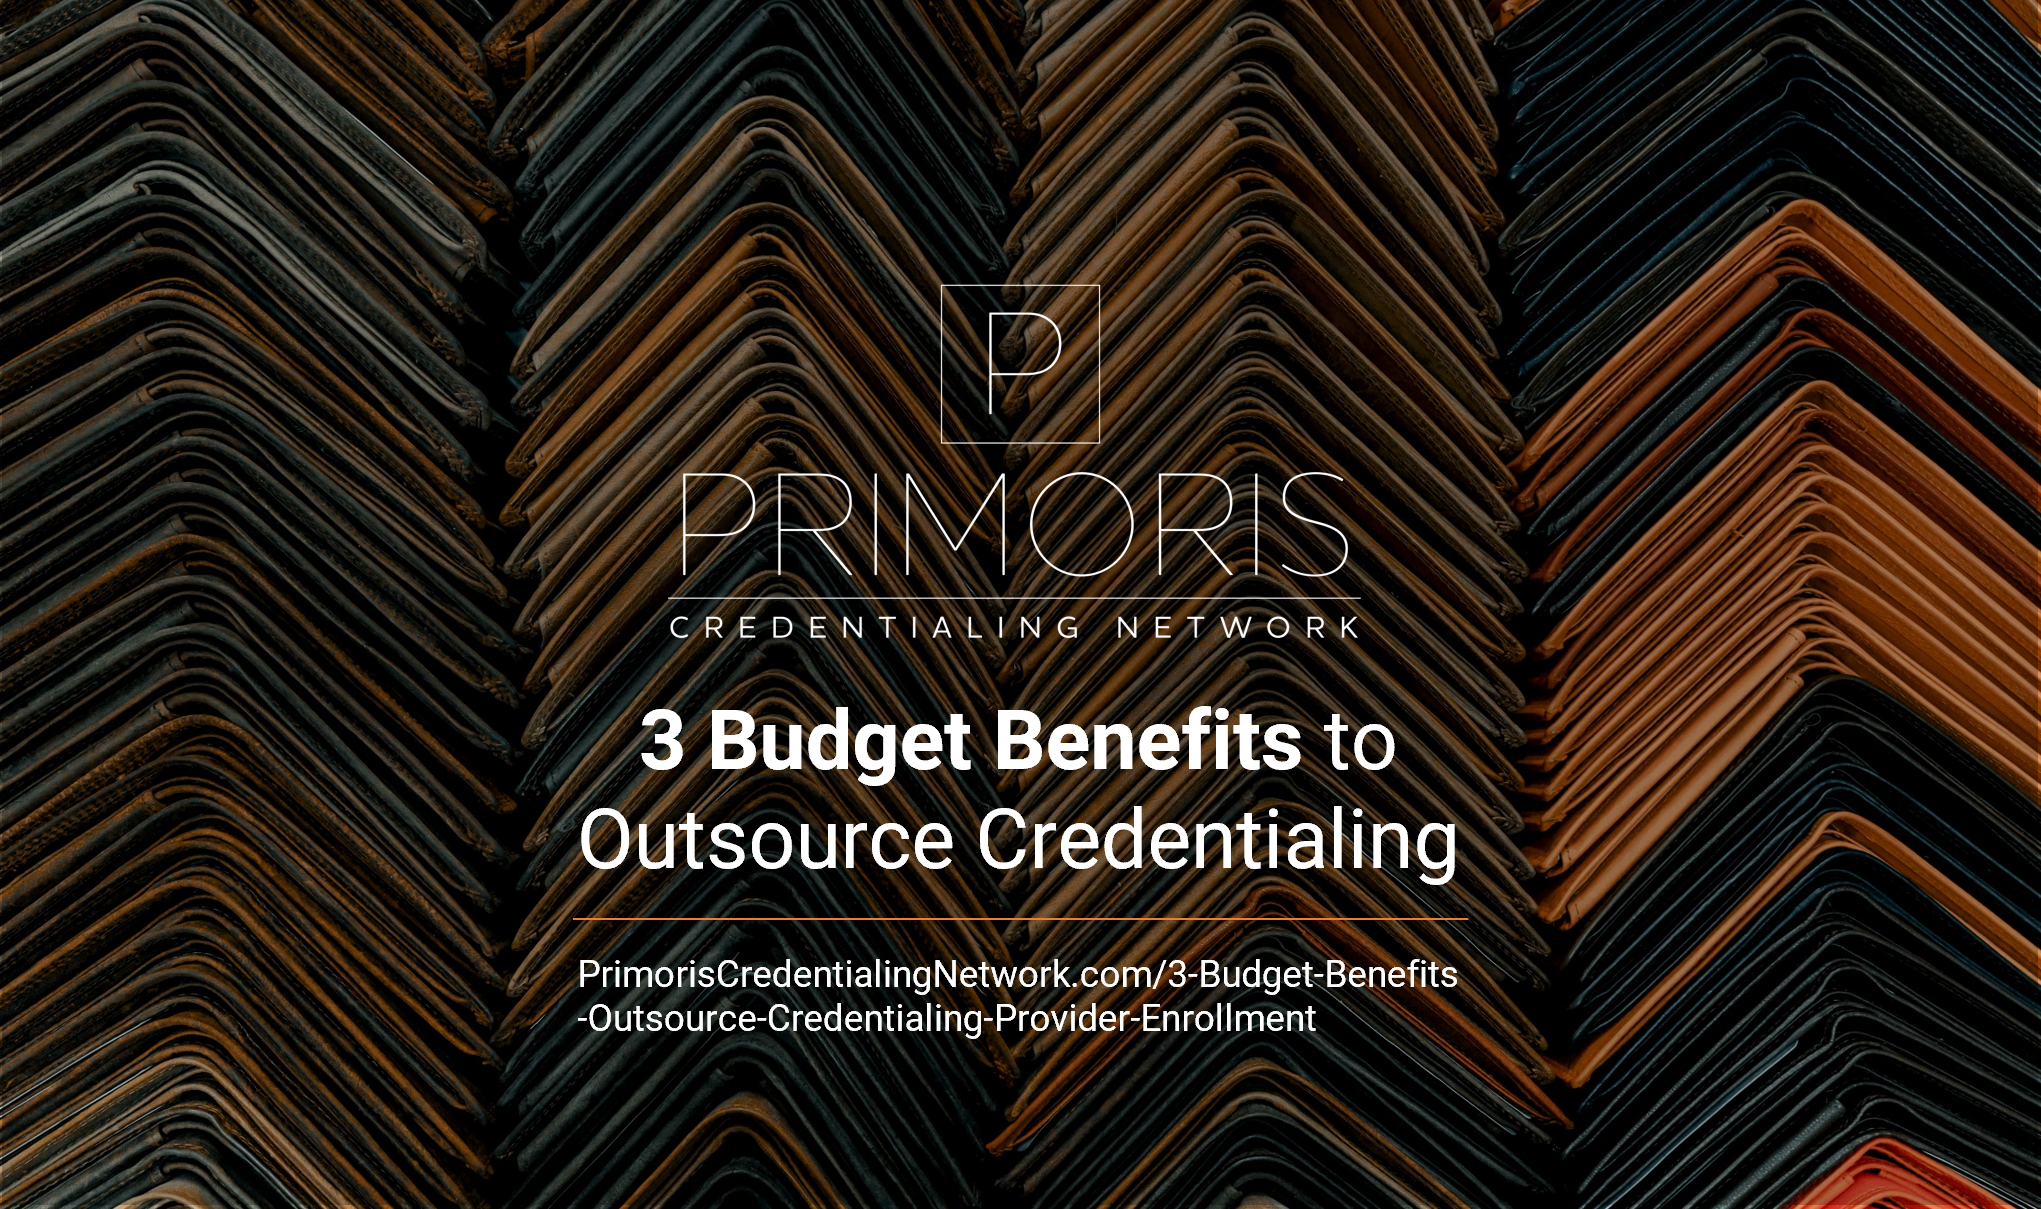 PrimorisCredentialingNetwork.com 3 Budget Benefits to Outsource Credentialing